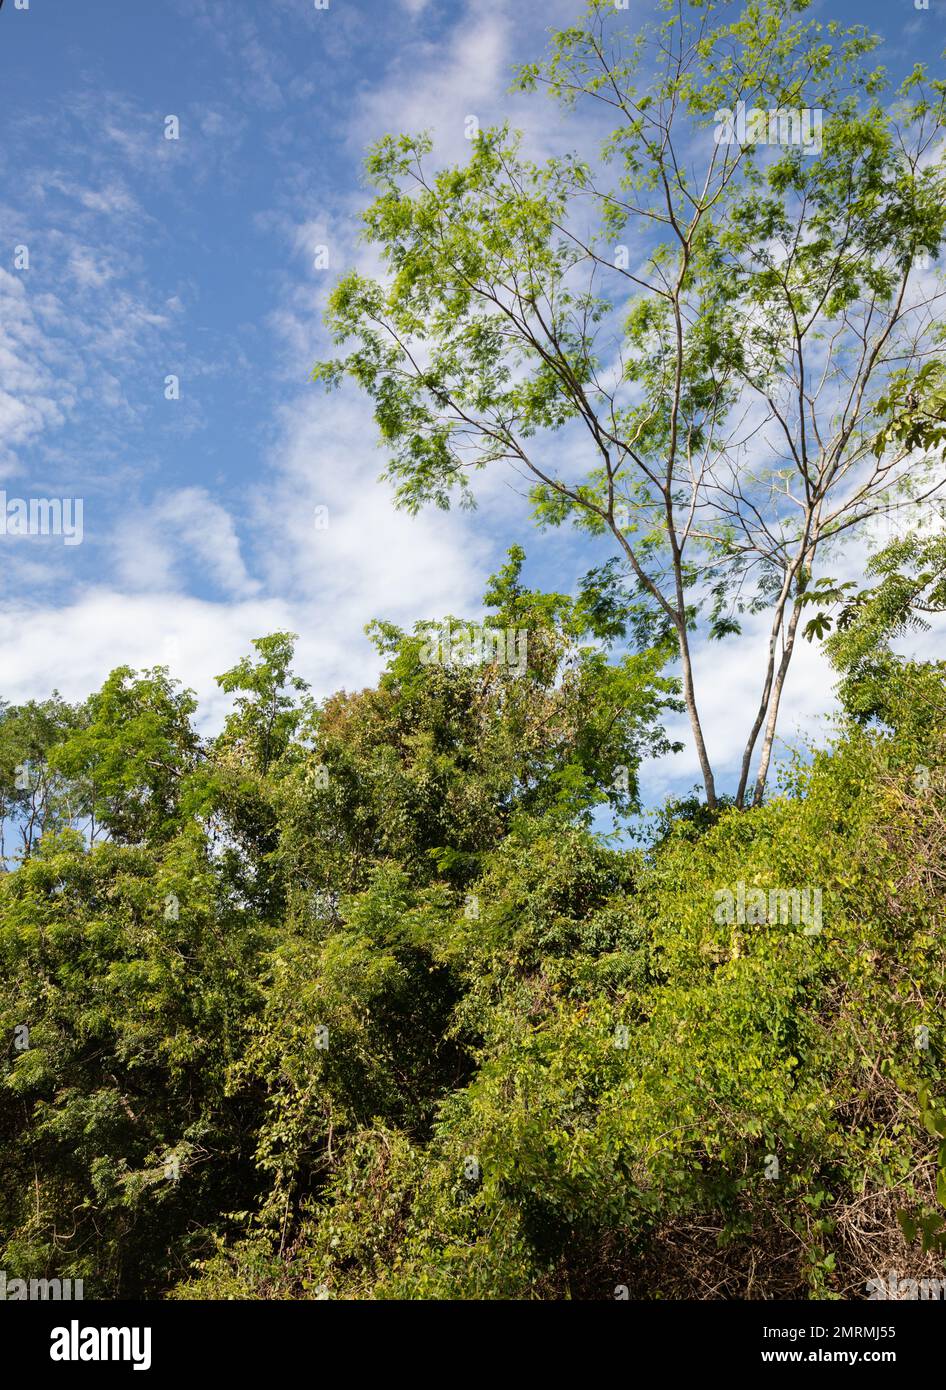 Nature background of green plants under blue sky Stock Photo